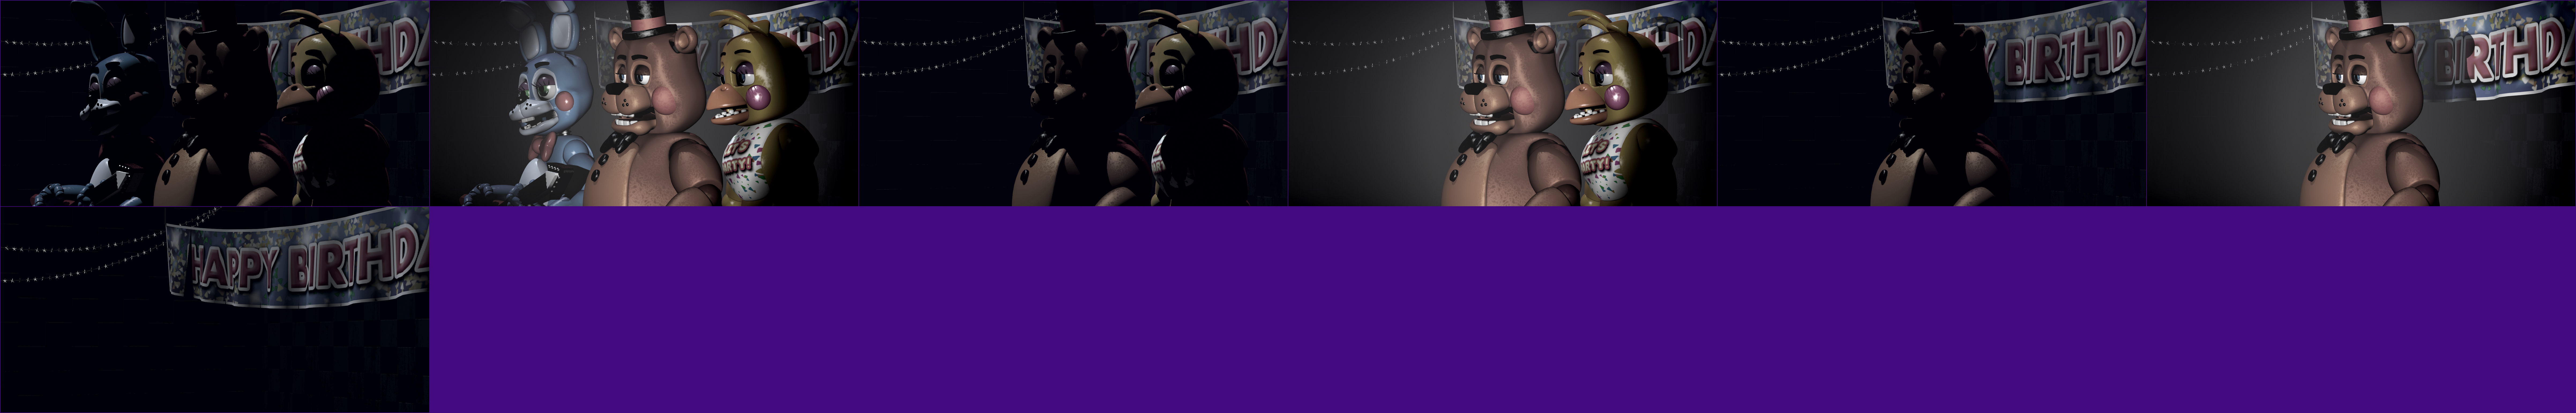 Five Nights at Freddy's 2 - Show Stage